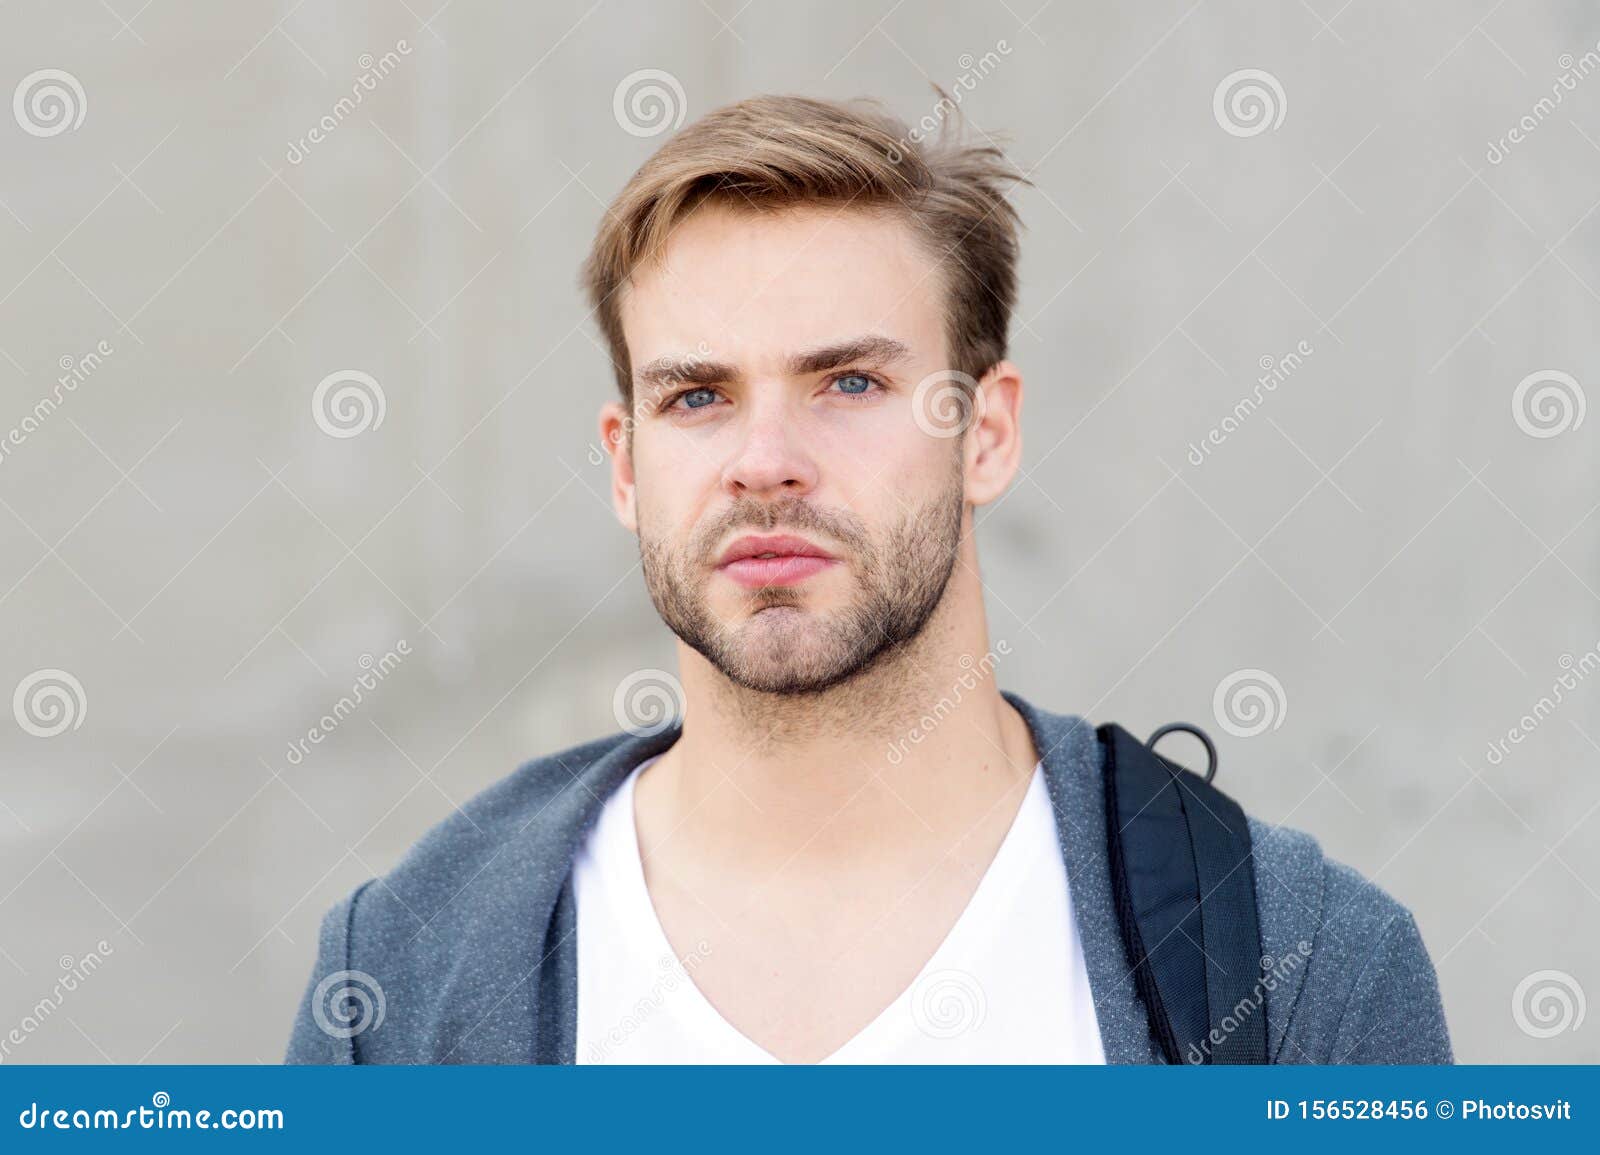 Male Beauty Standards. Ideal Traits that Make Man Physically Attractive  Stock Photo - Image of hair, masculine: 156528456